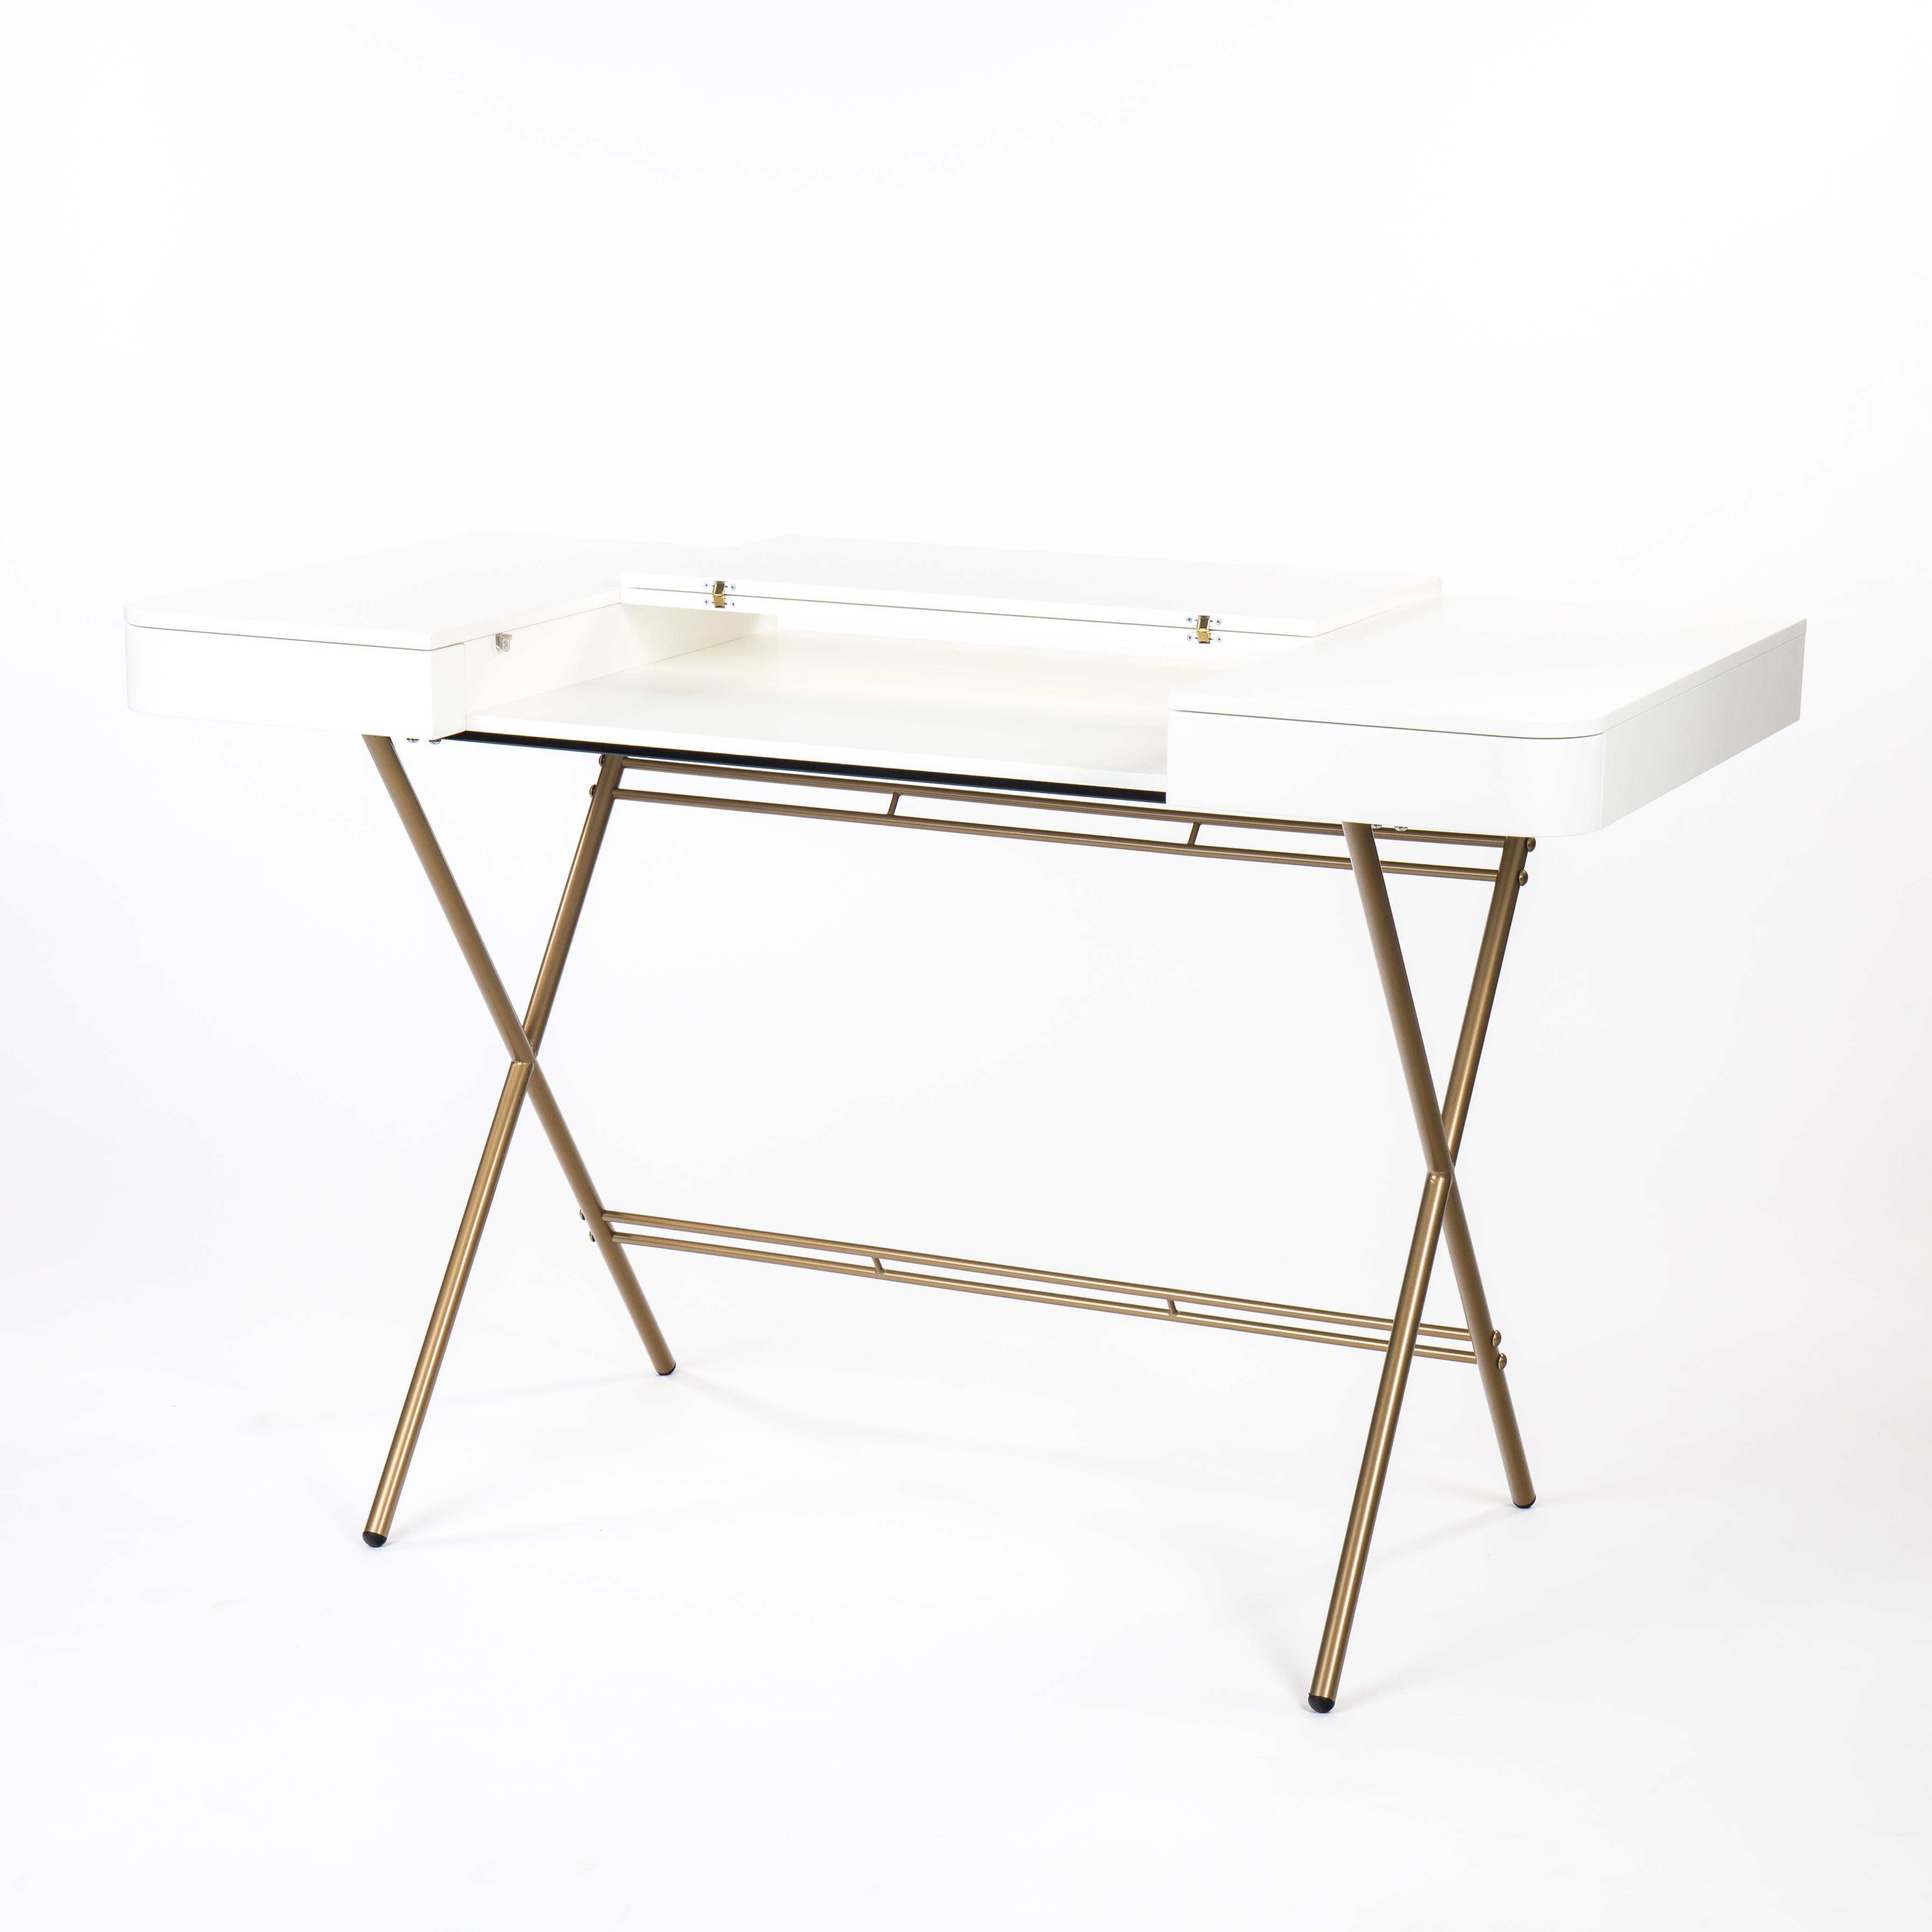 The Cosimo desk was designed by the architect Marco Zanuso Jr. in 2017 for luxury French furniture brand, Adentro Paris. The central panel of the desktop folds back to reveal a hidden shelf below, and integrated drawers on either side provide ample